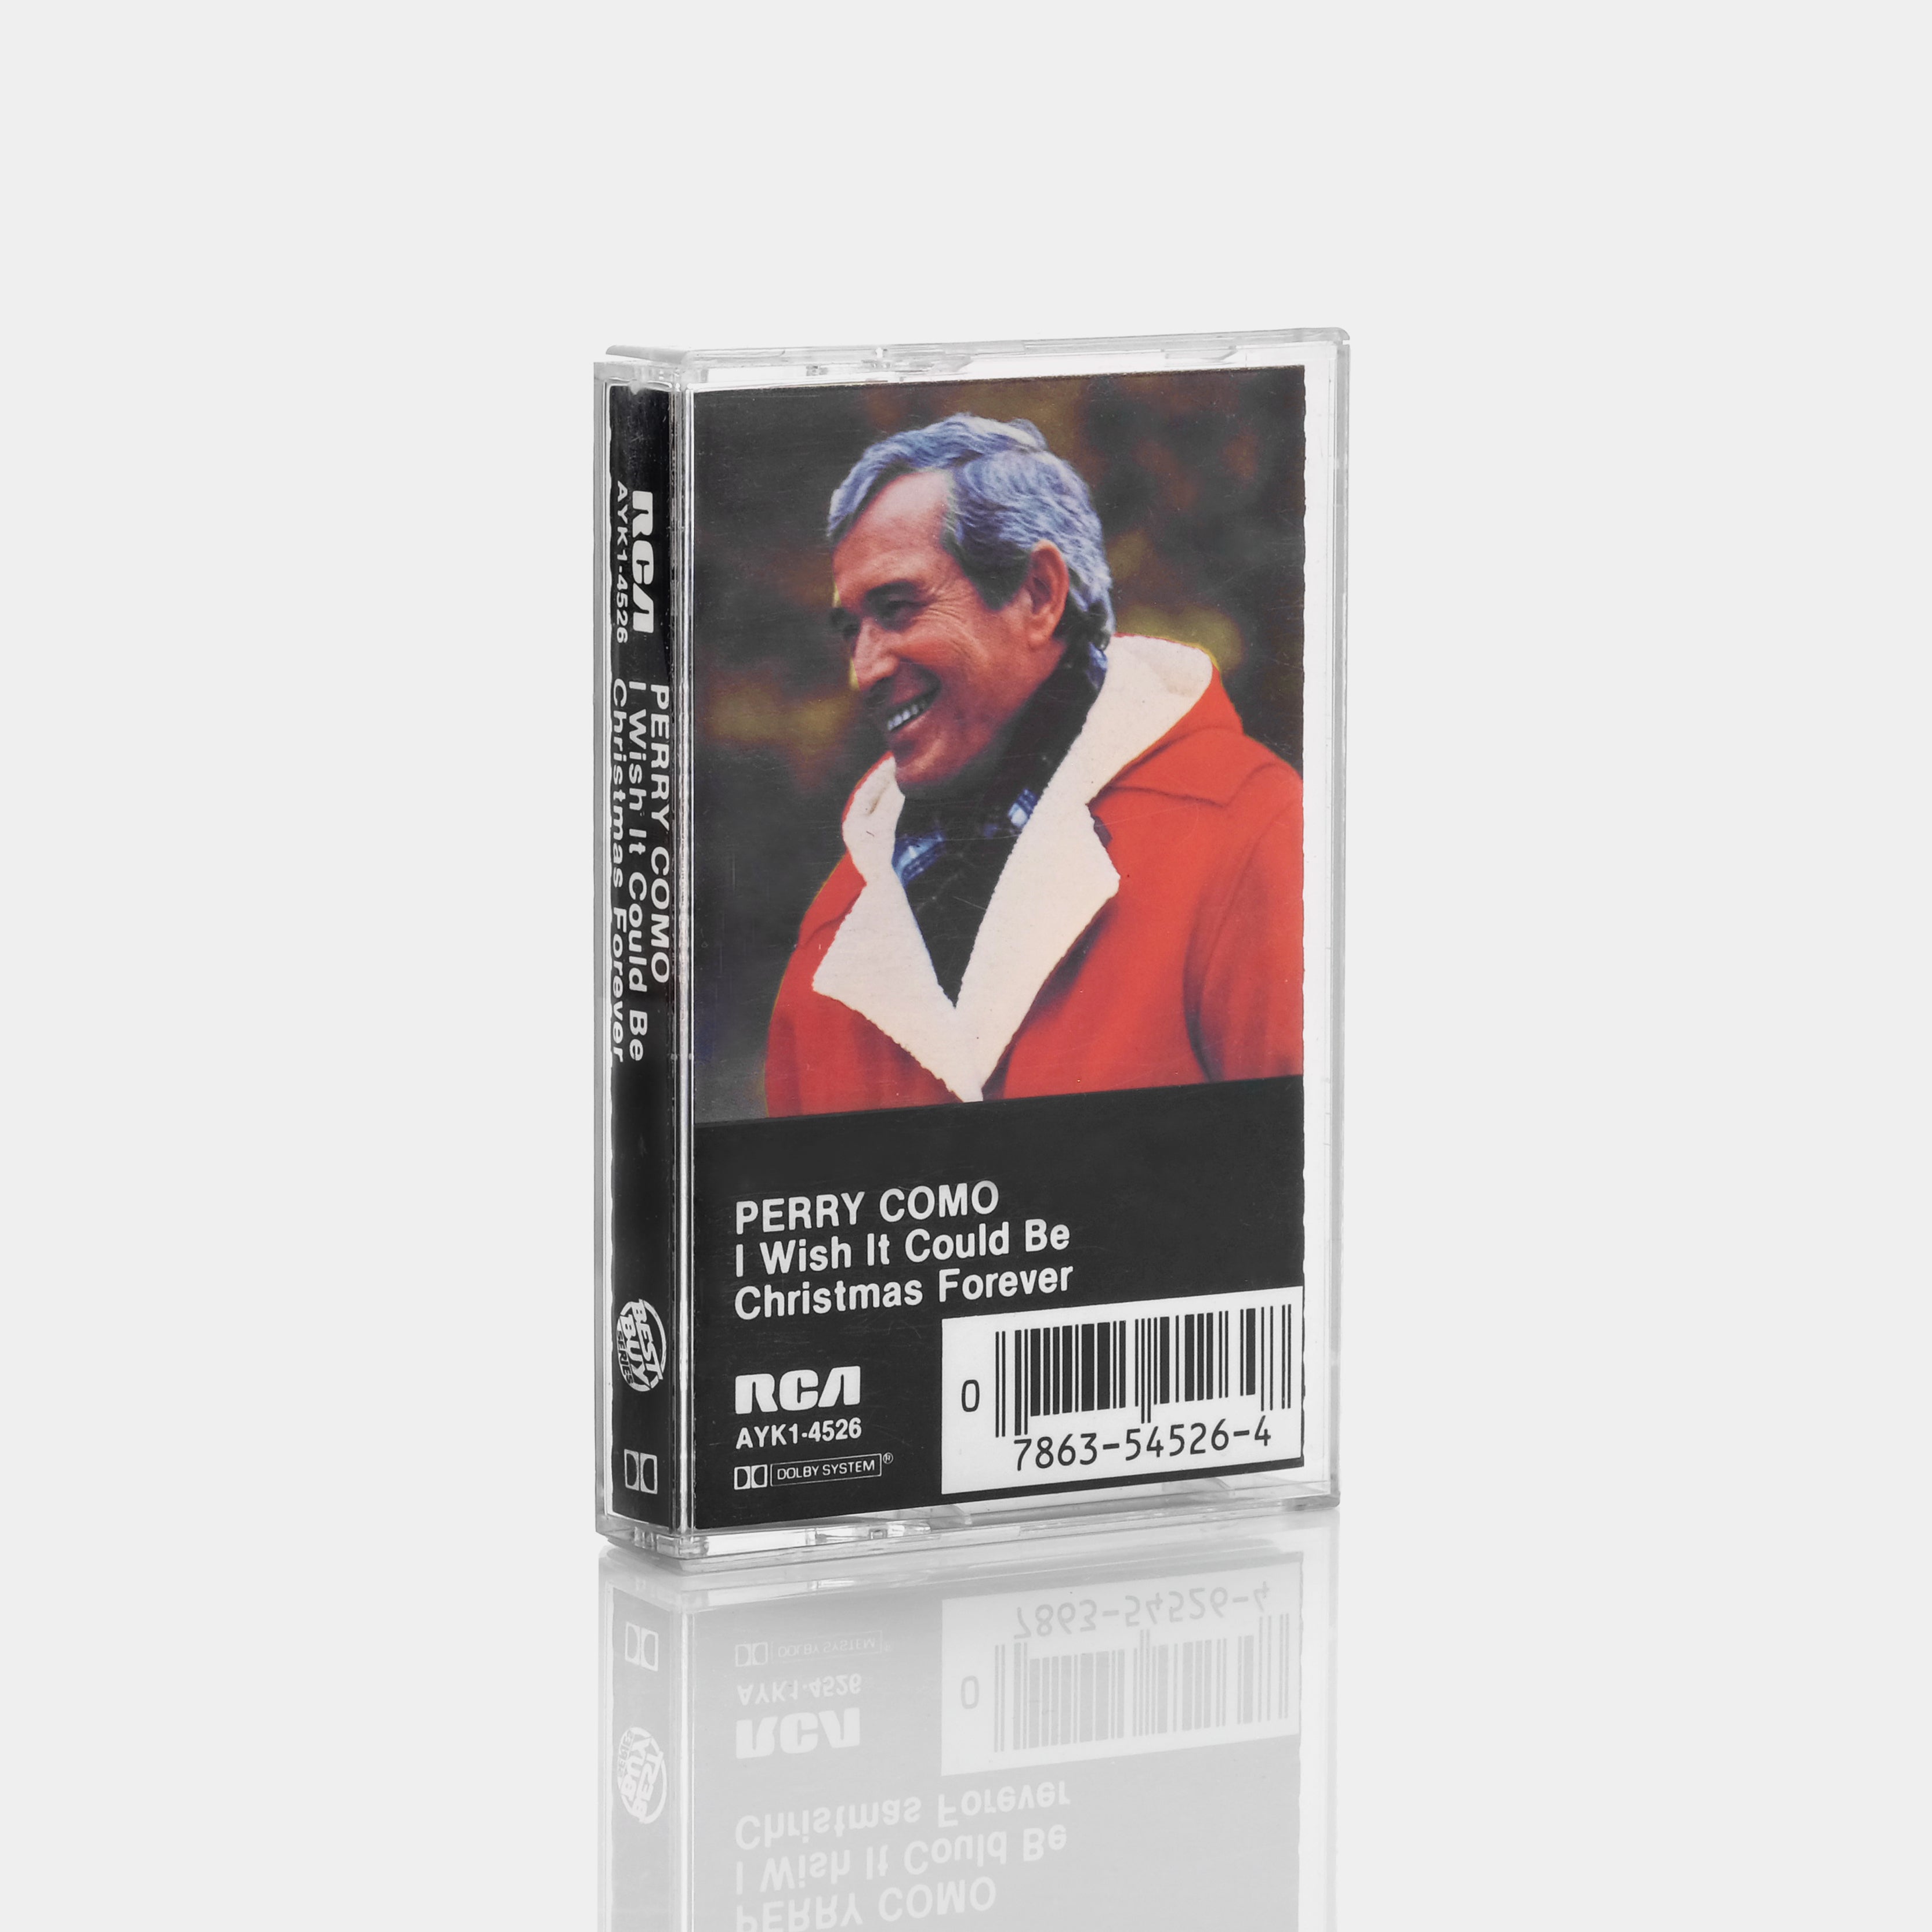 Perry Como - I Wish It Could Be Christmas Forever Cassette Tape